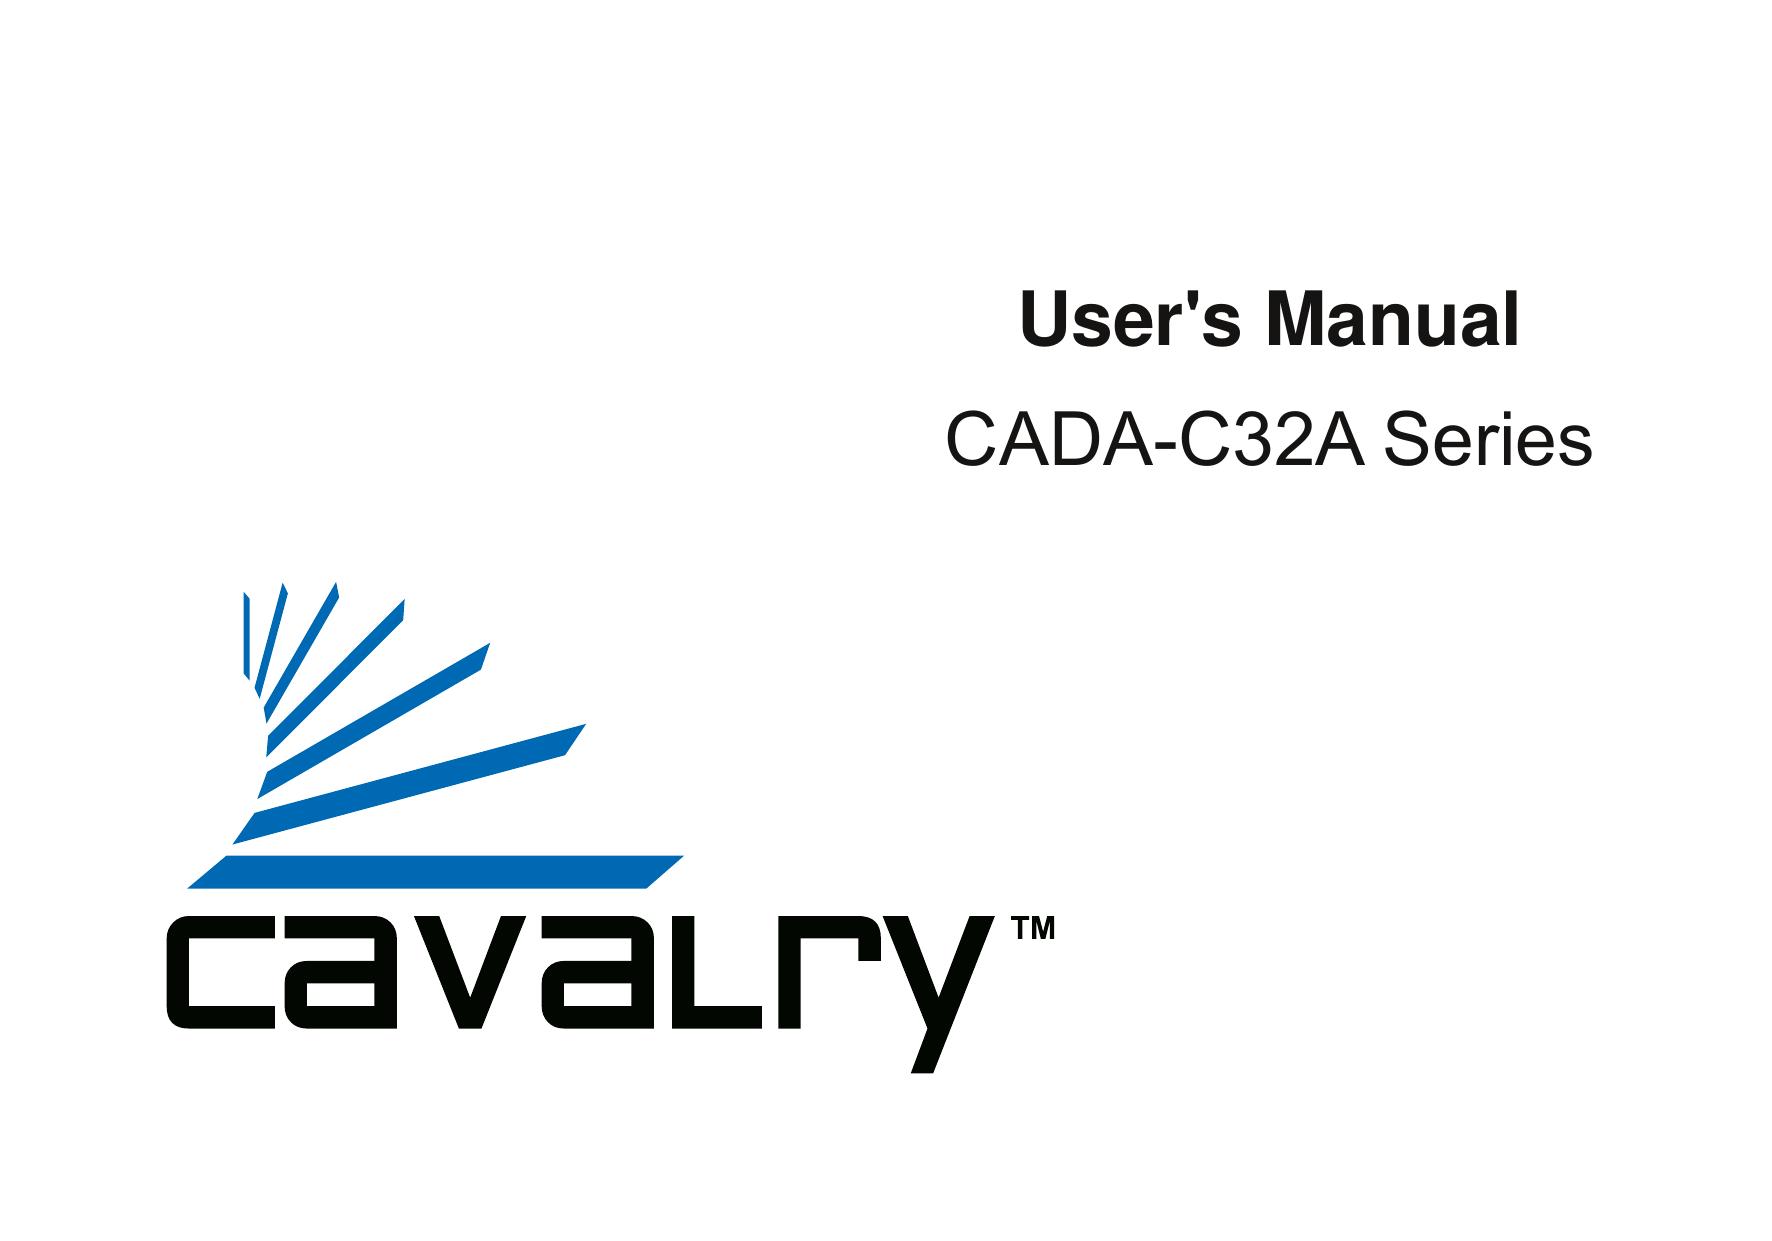 Cavalry Storage CADA-C32A Washer/Dryer User Manual (Page 1)